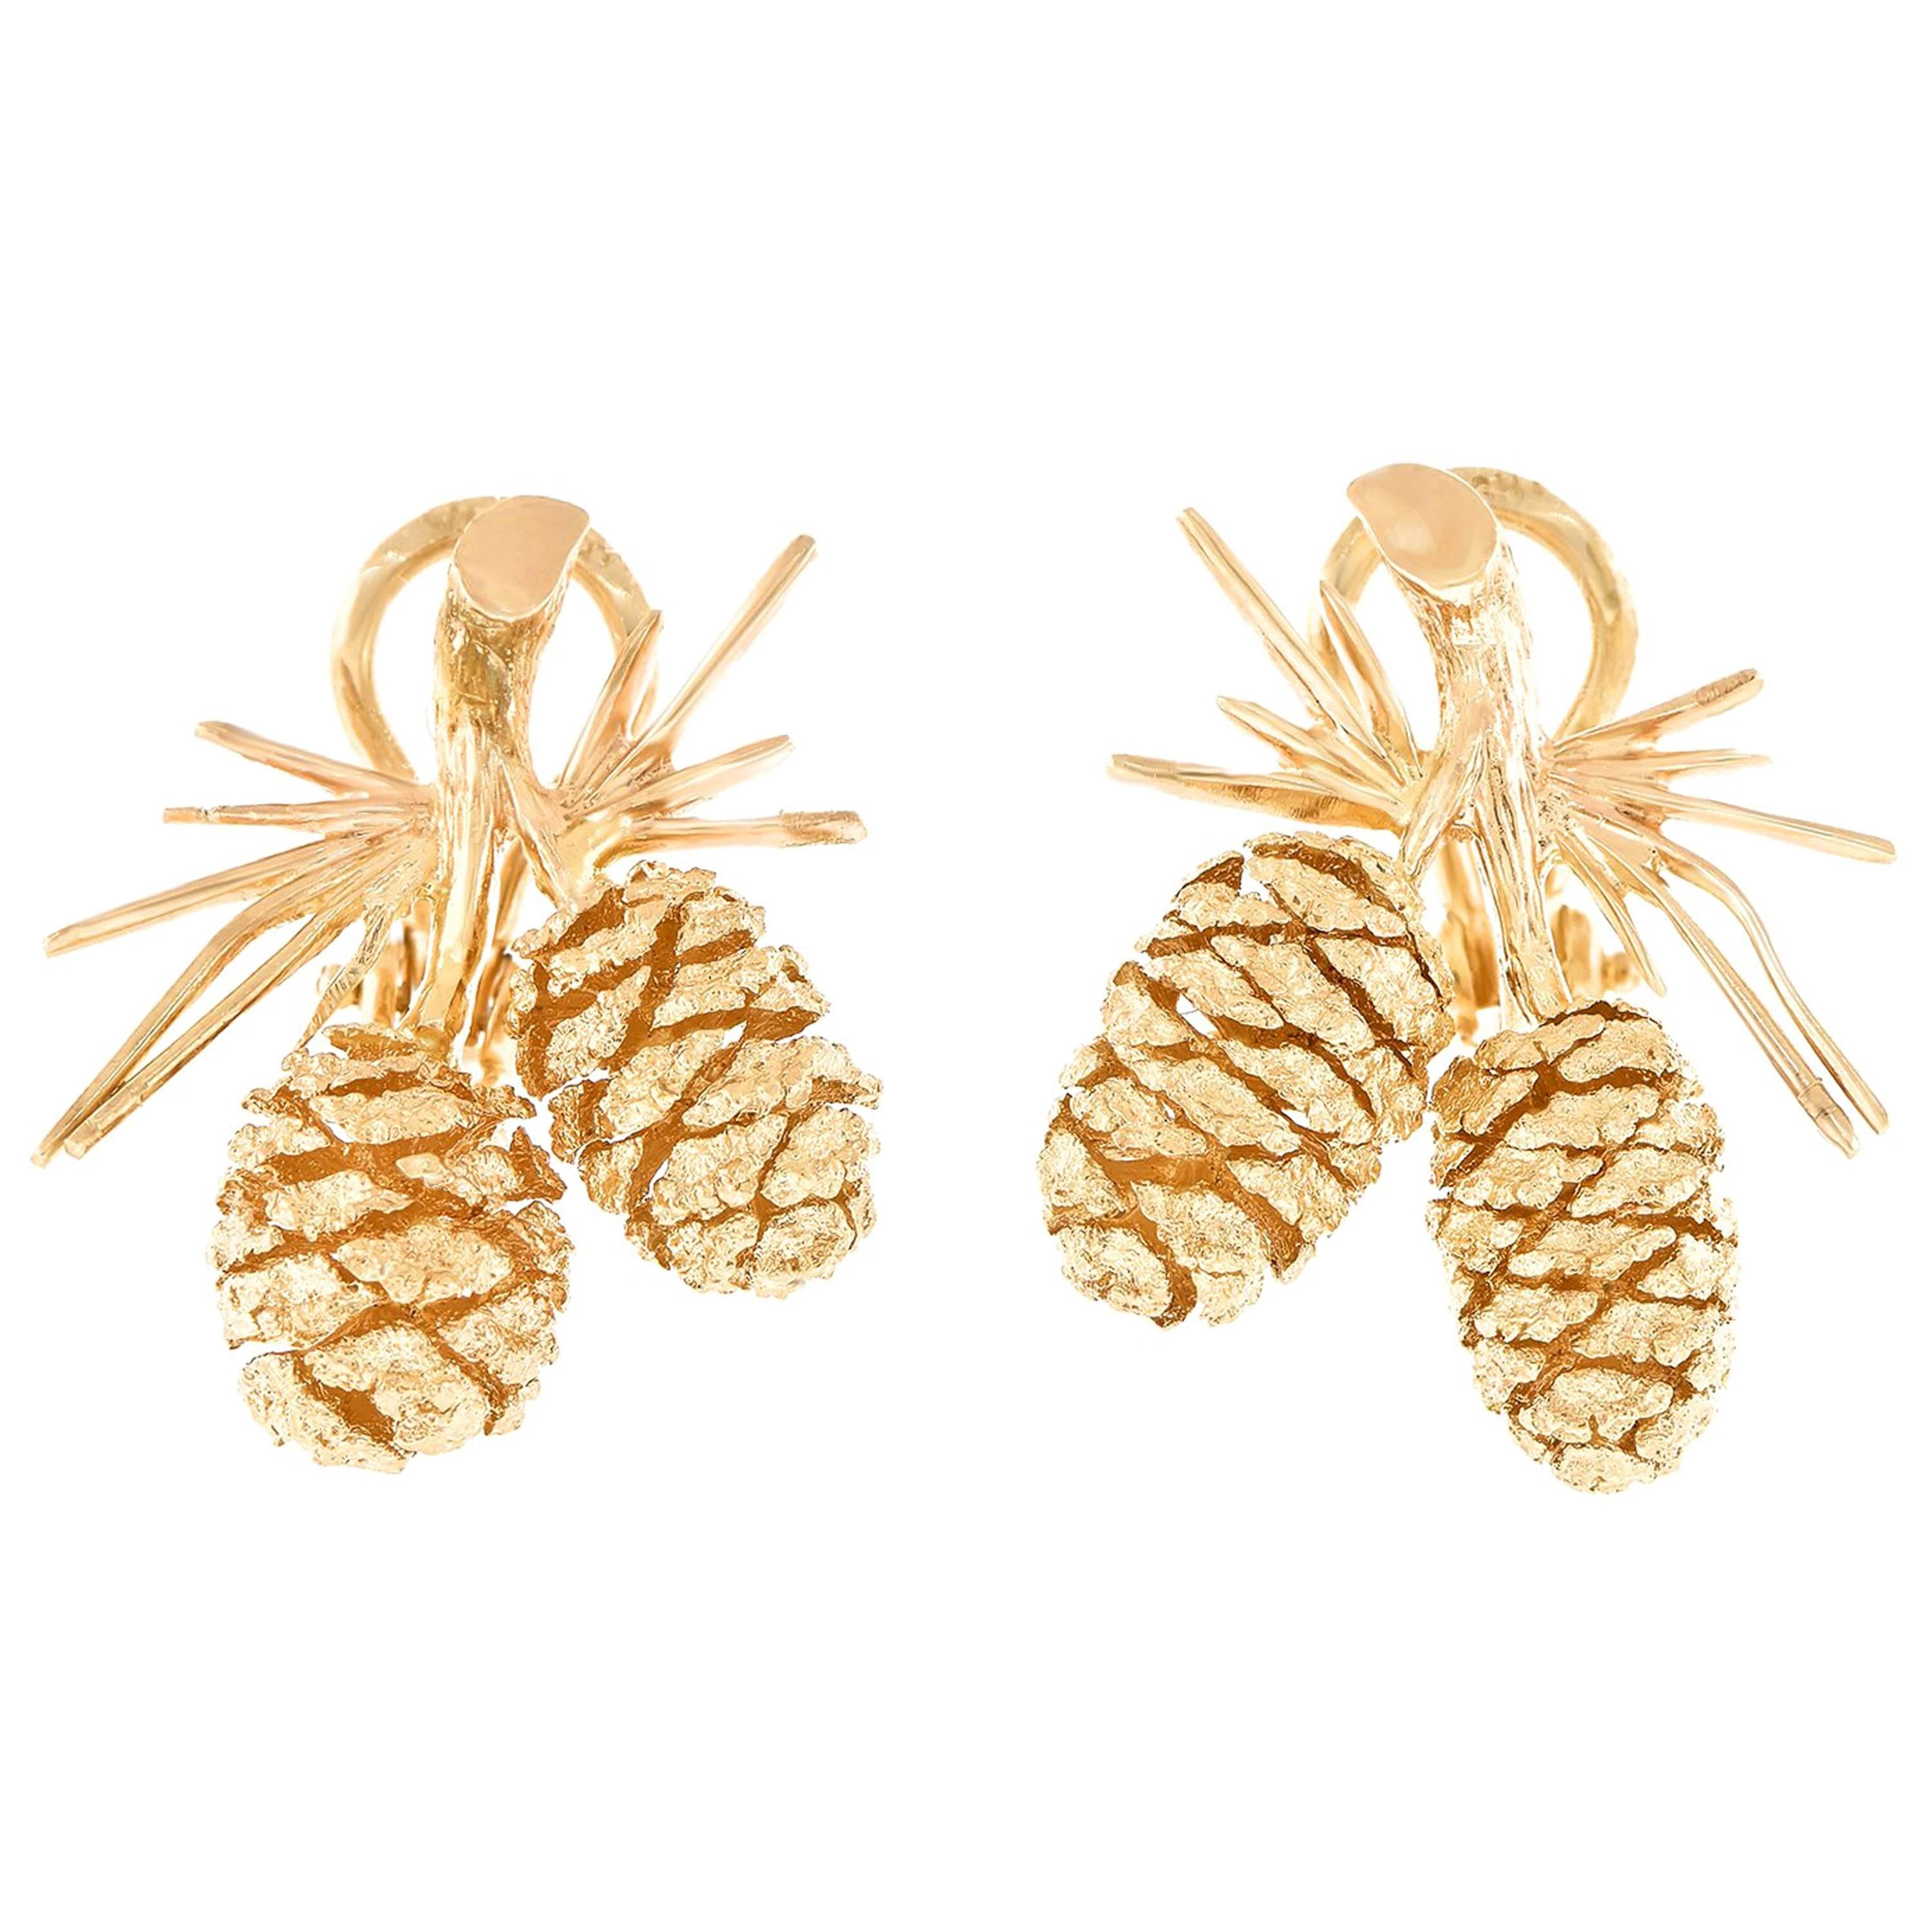 Charming 1950s Gold Pinecone Earrings